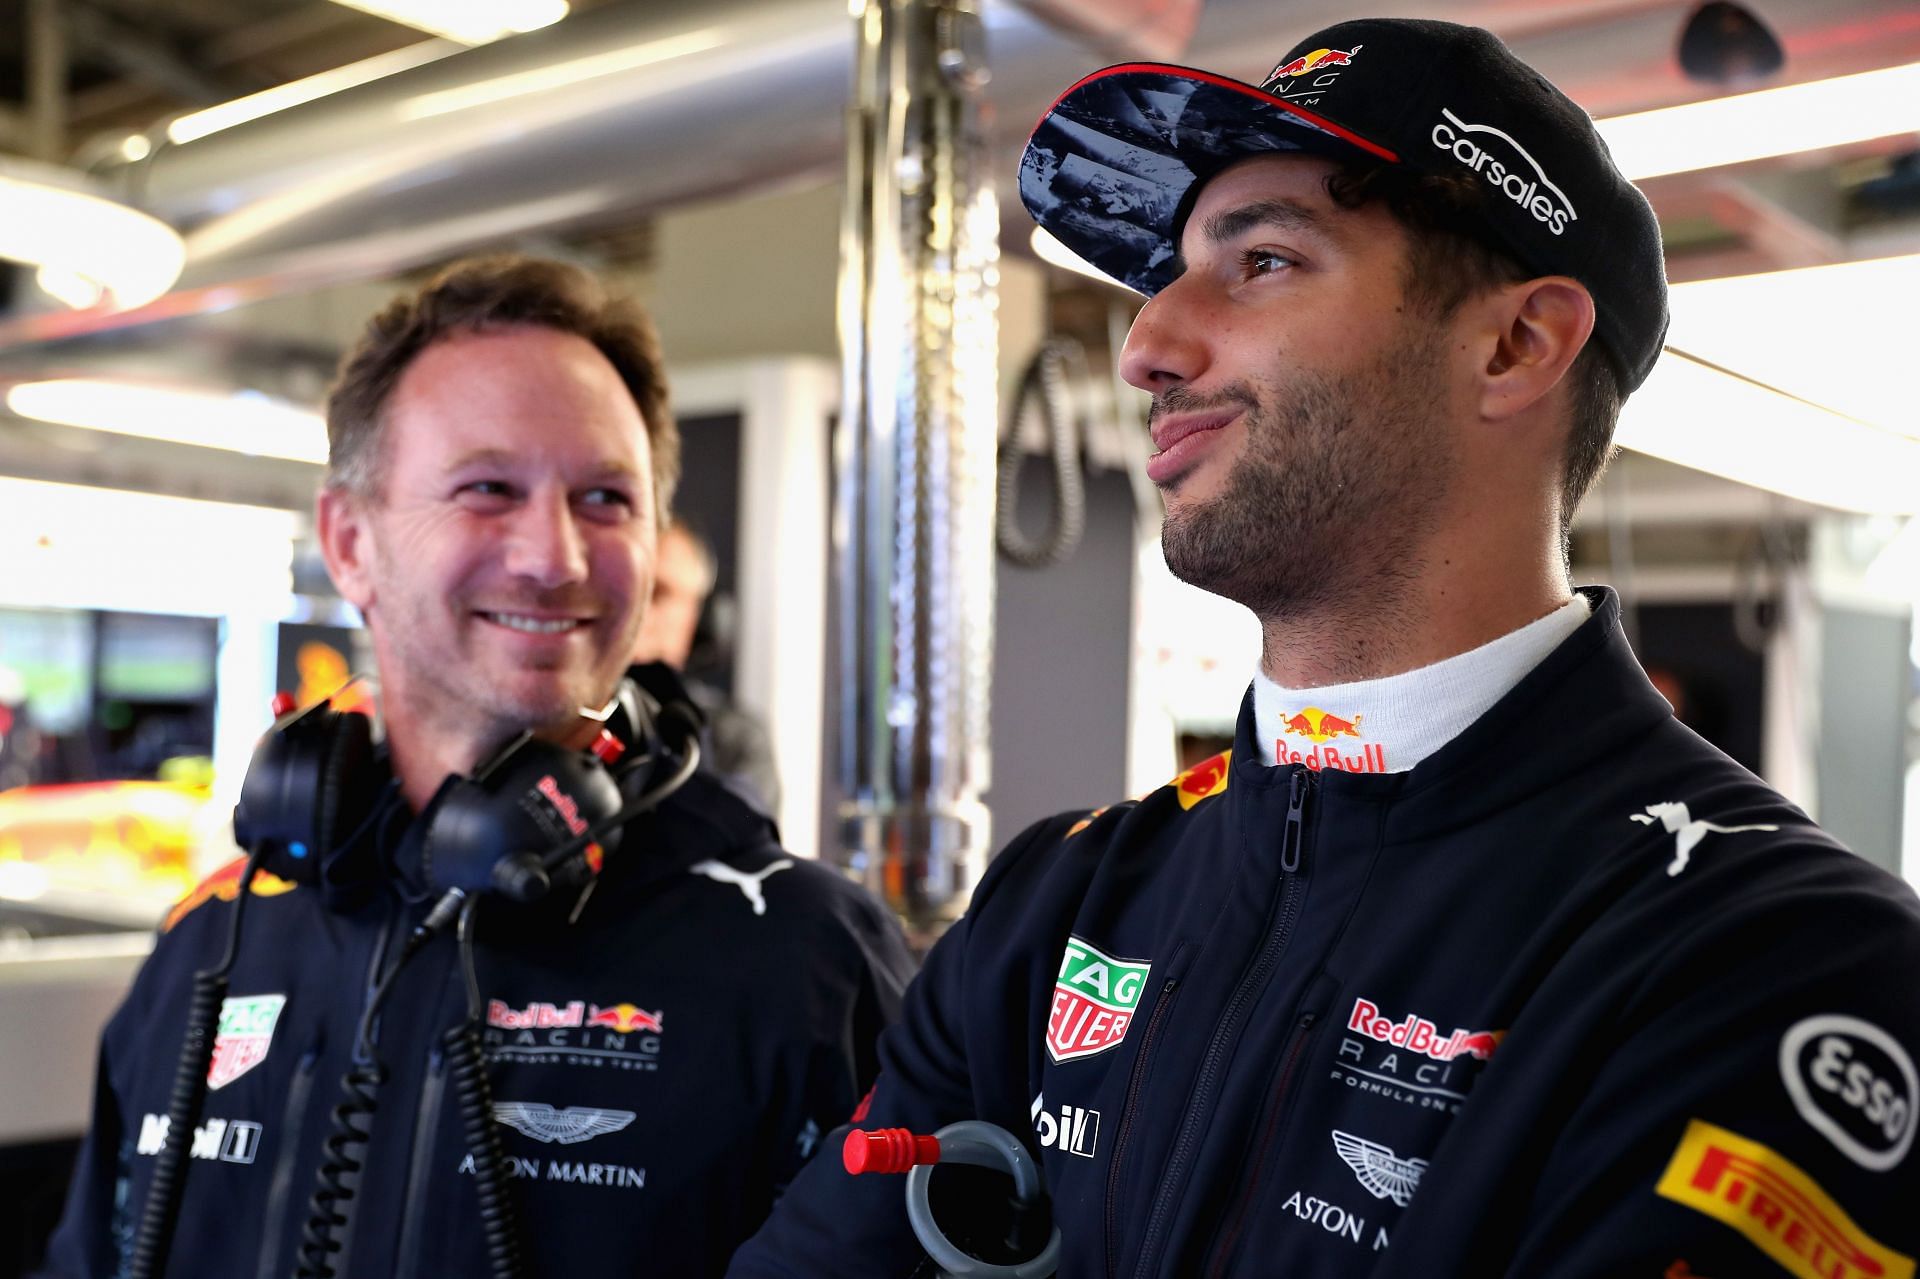 Red Bull has 'the strongest line-up on the grid' with Daniel Ricciardo ...